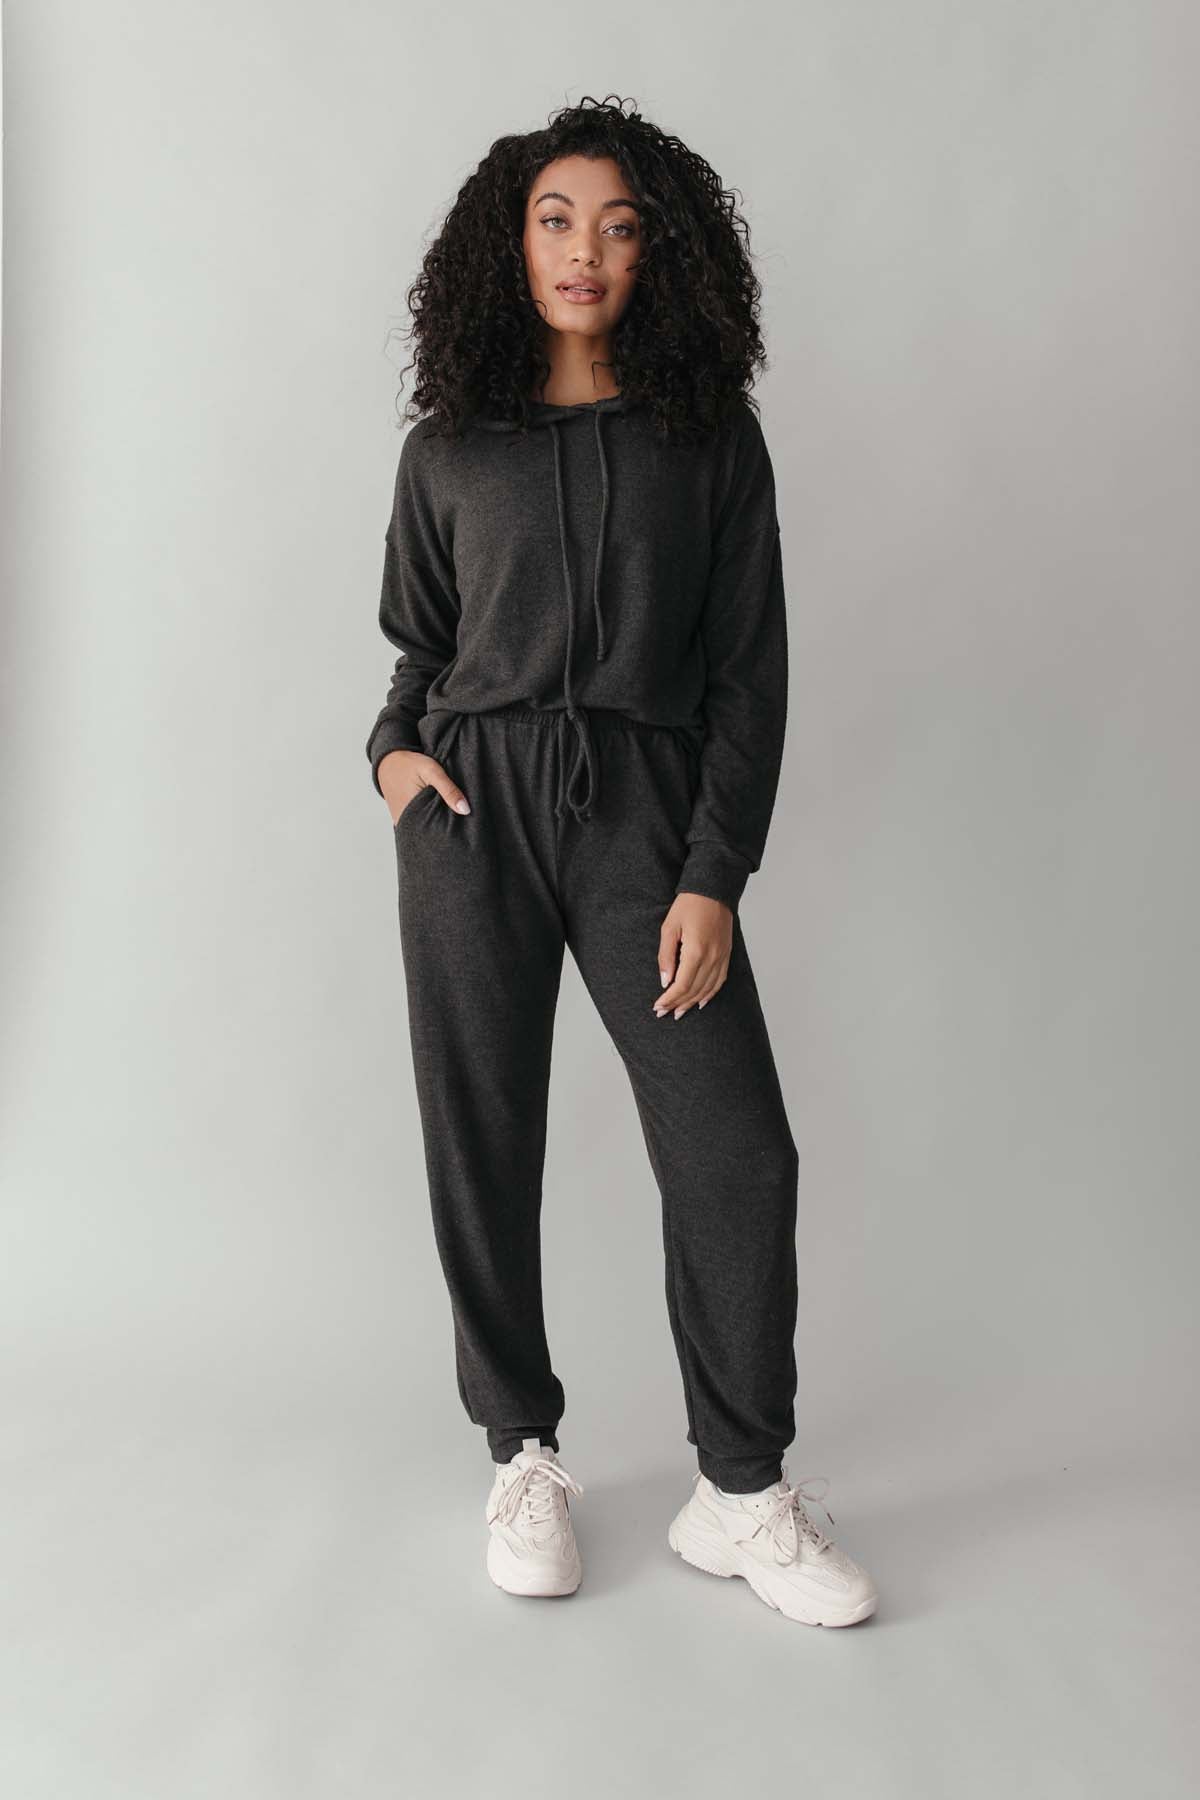 Knitted Black Womens Tracksuits - Get Best Price from